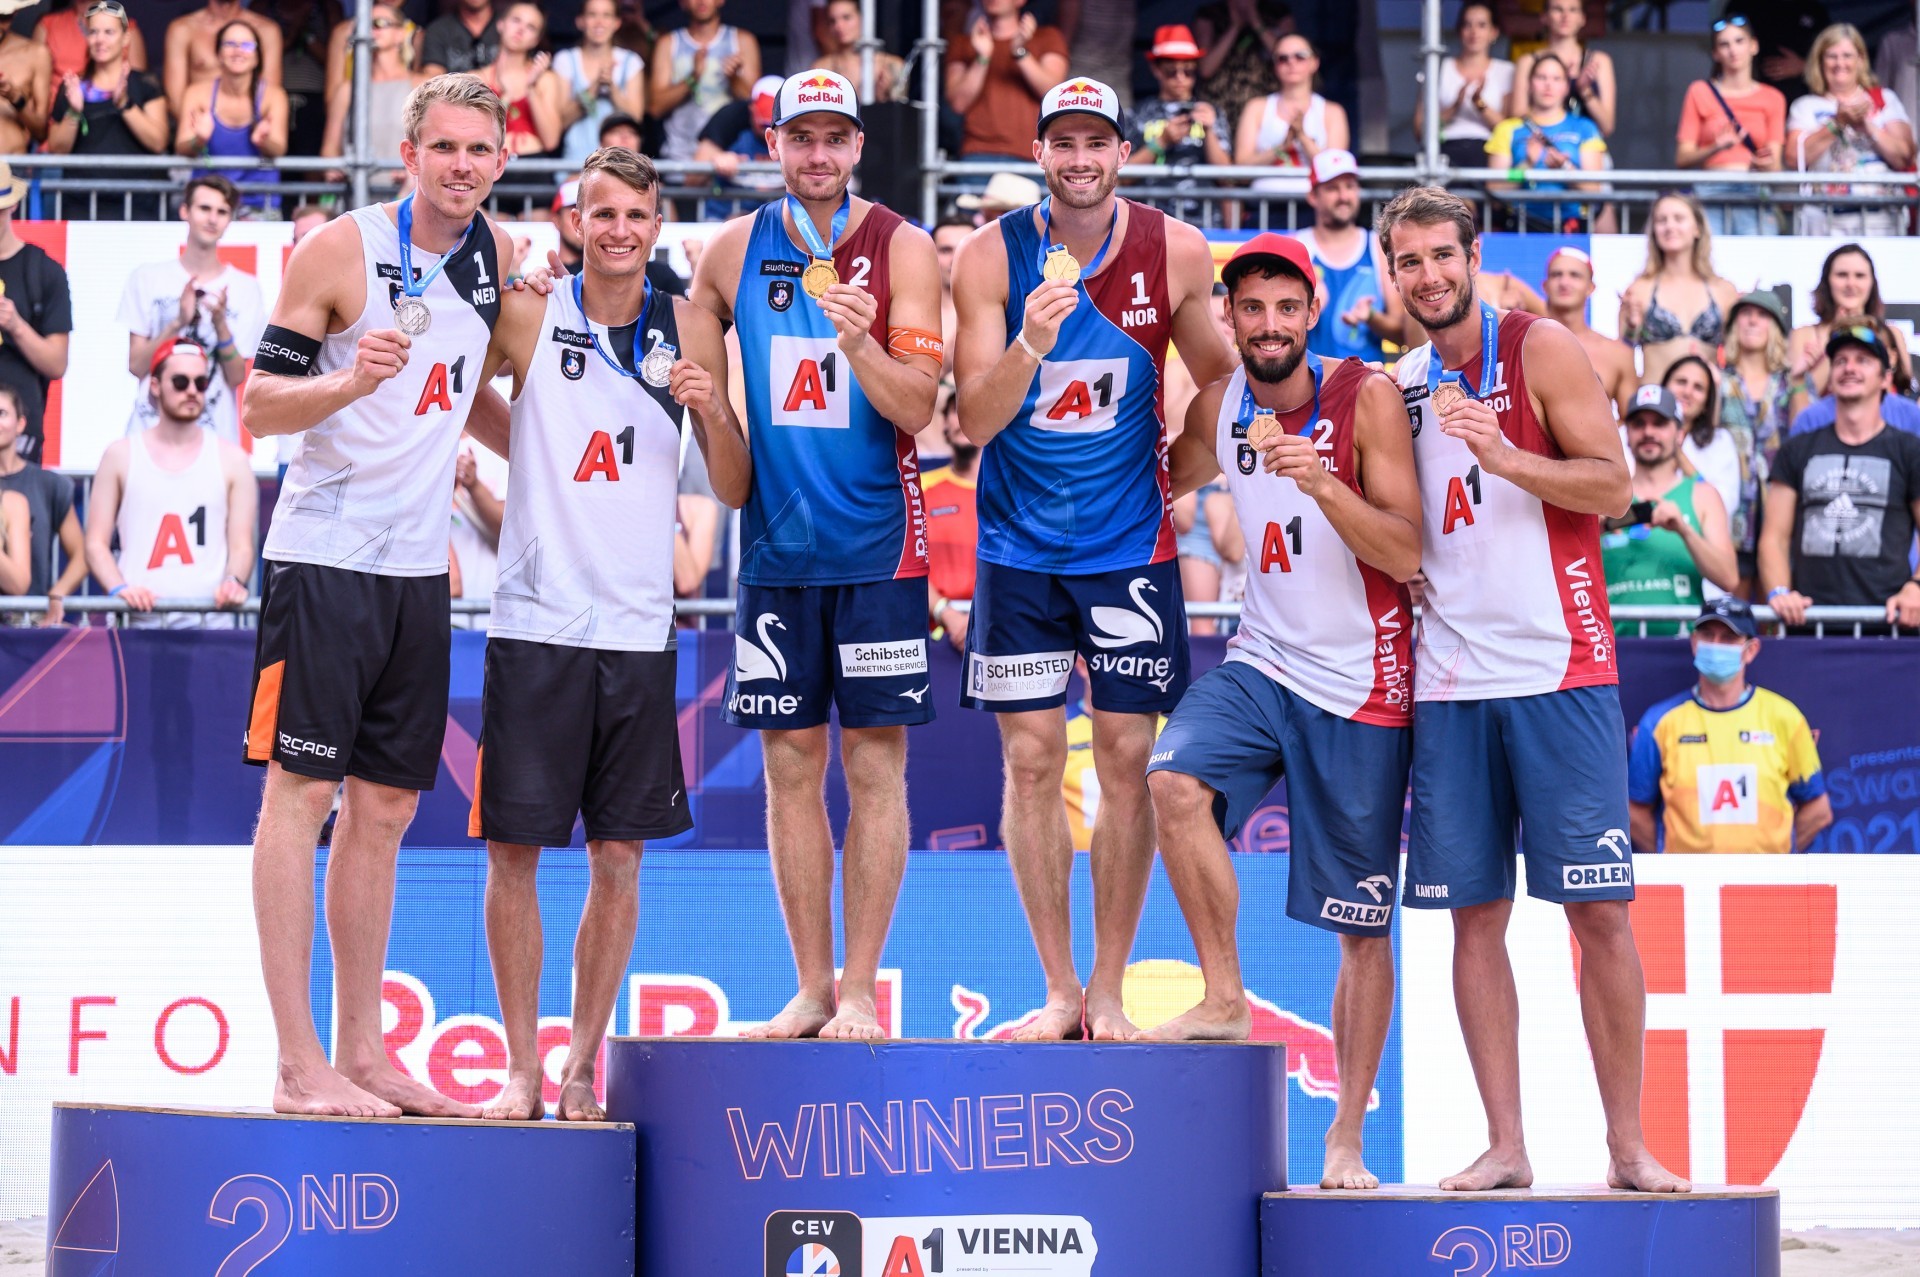 The medalists stand on the podium at the Red Bull Beach Arena